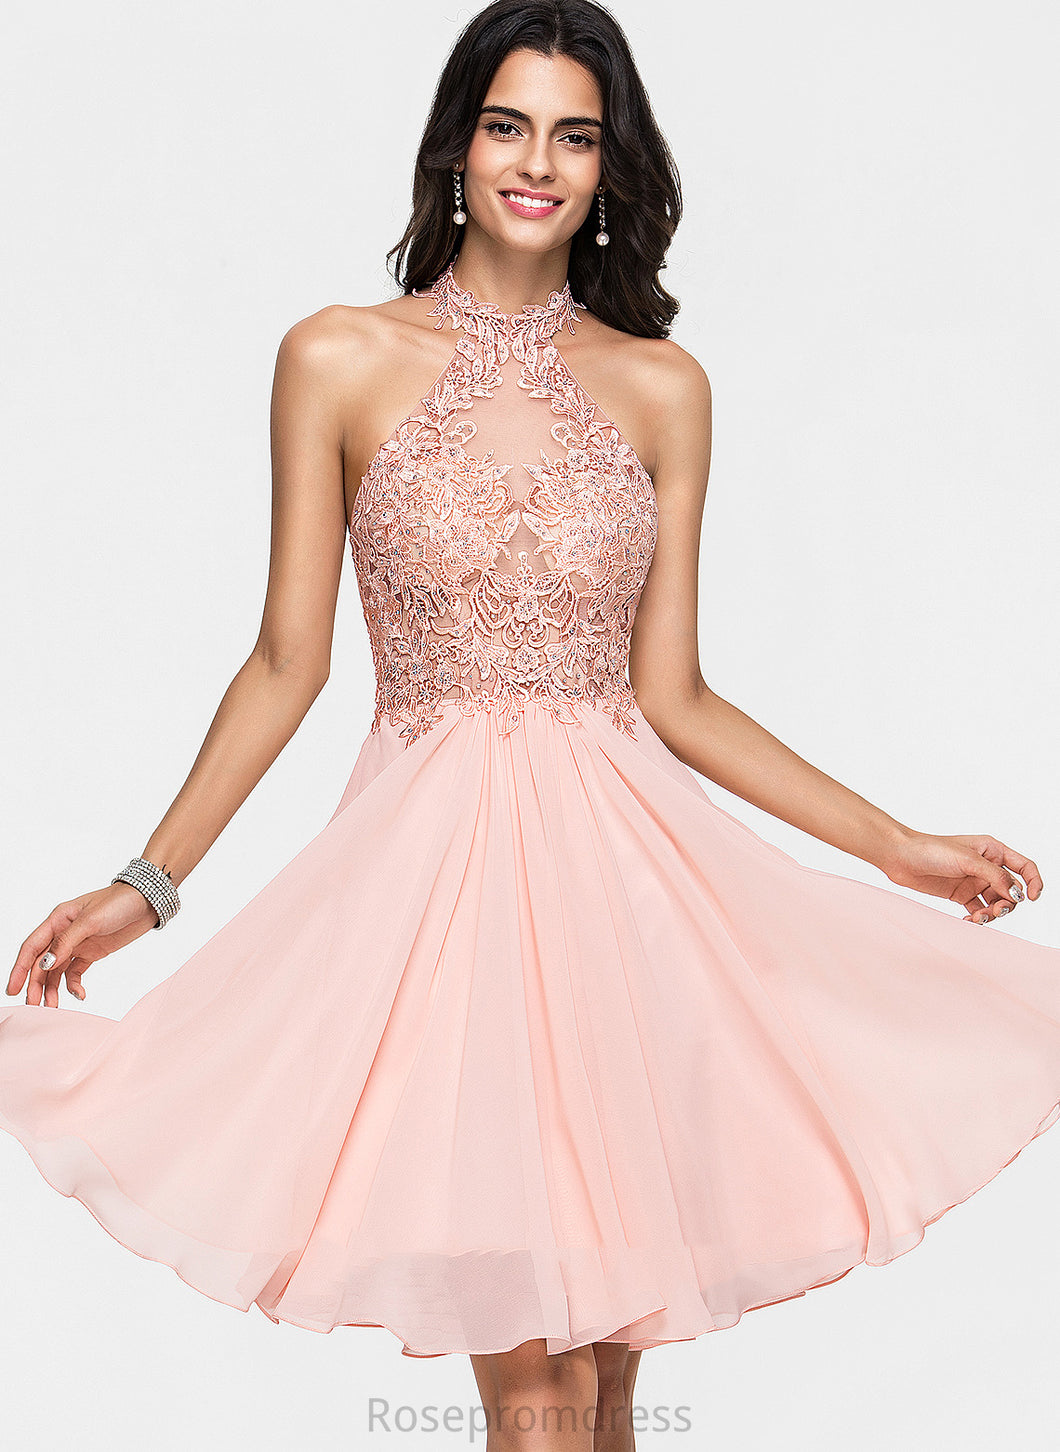 Lace Beading With Janae Dress Chiffon Knee-Length A-Line Homecoming Dresses Homecoming Halter